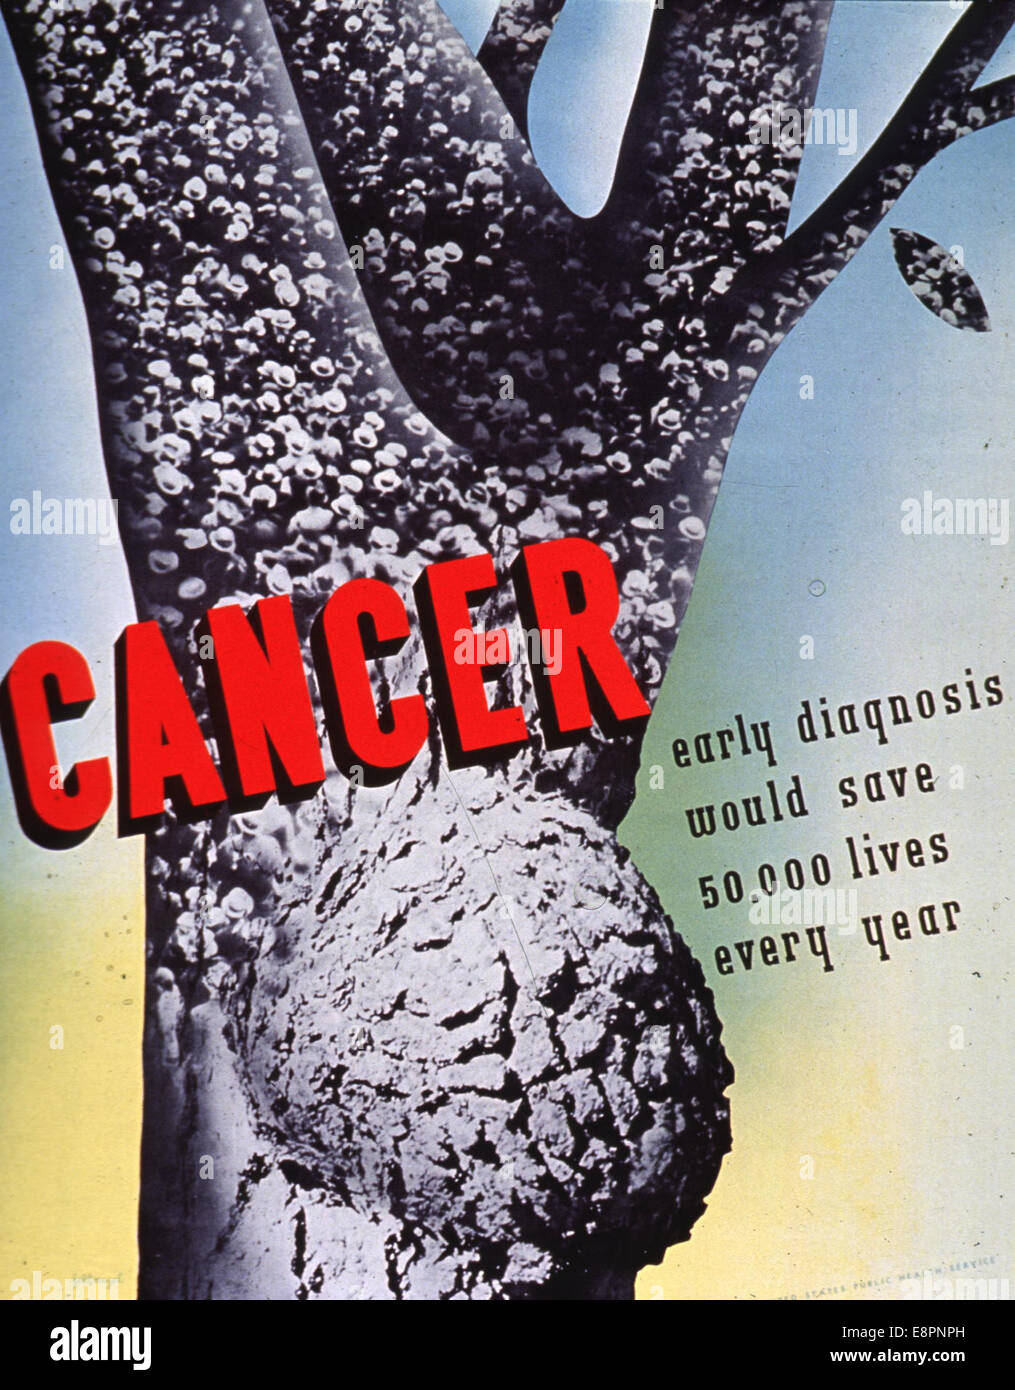 Publication Information: United States: Public Health Service,19- Physical Description: 1 photomechanical print (poster): col.; 71 x 56 cm. Image Description: Multicolor poster with red and black lettering. Title at center of poster. Visual image is a bla Stock Photo